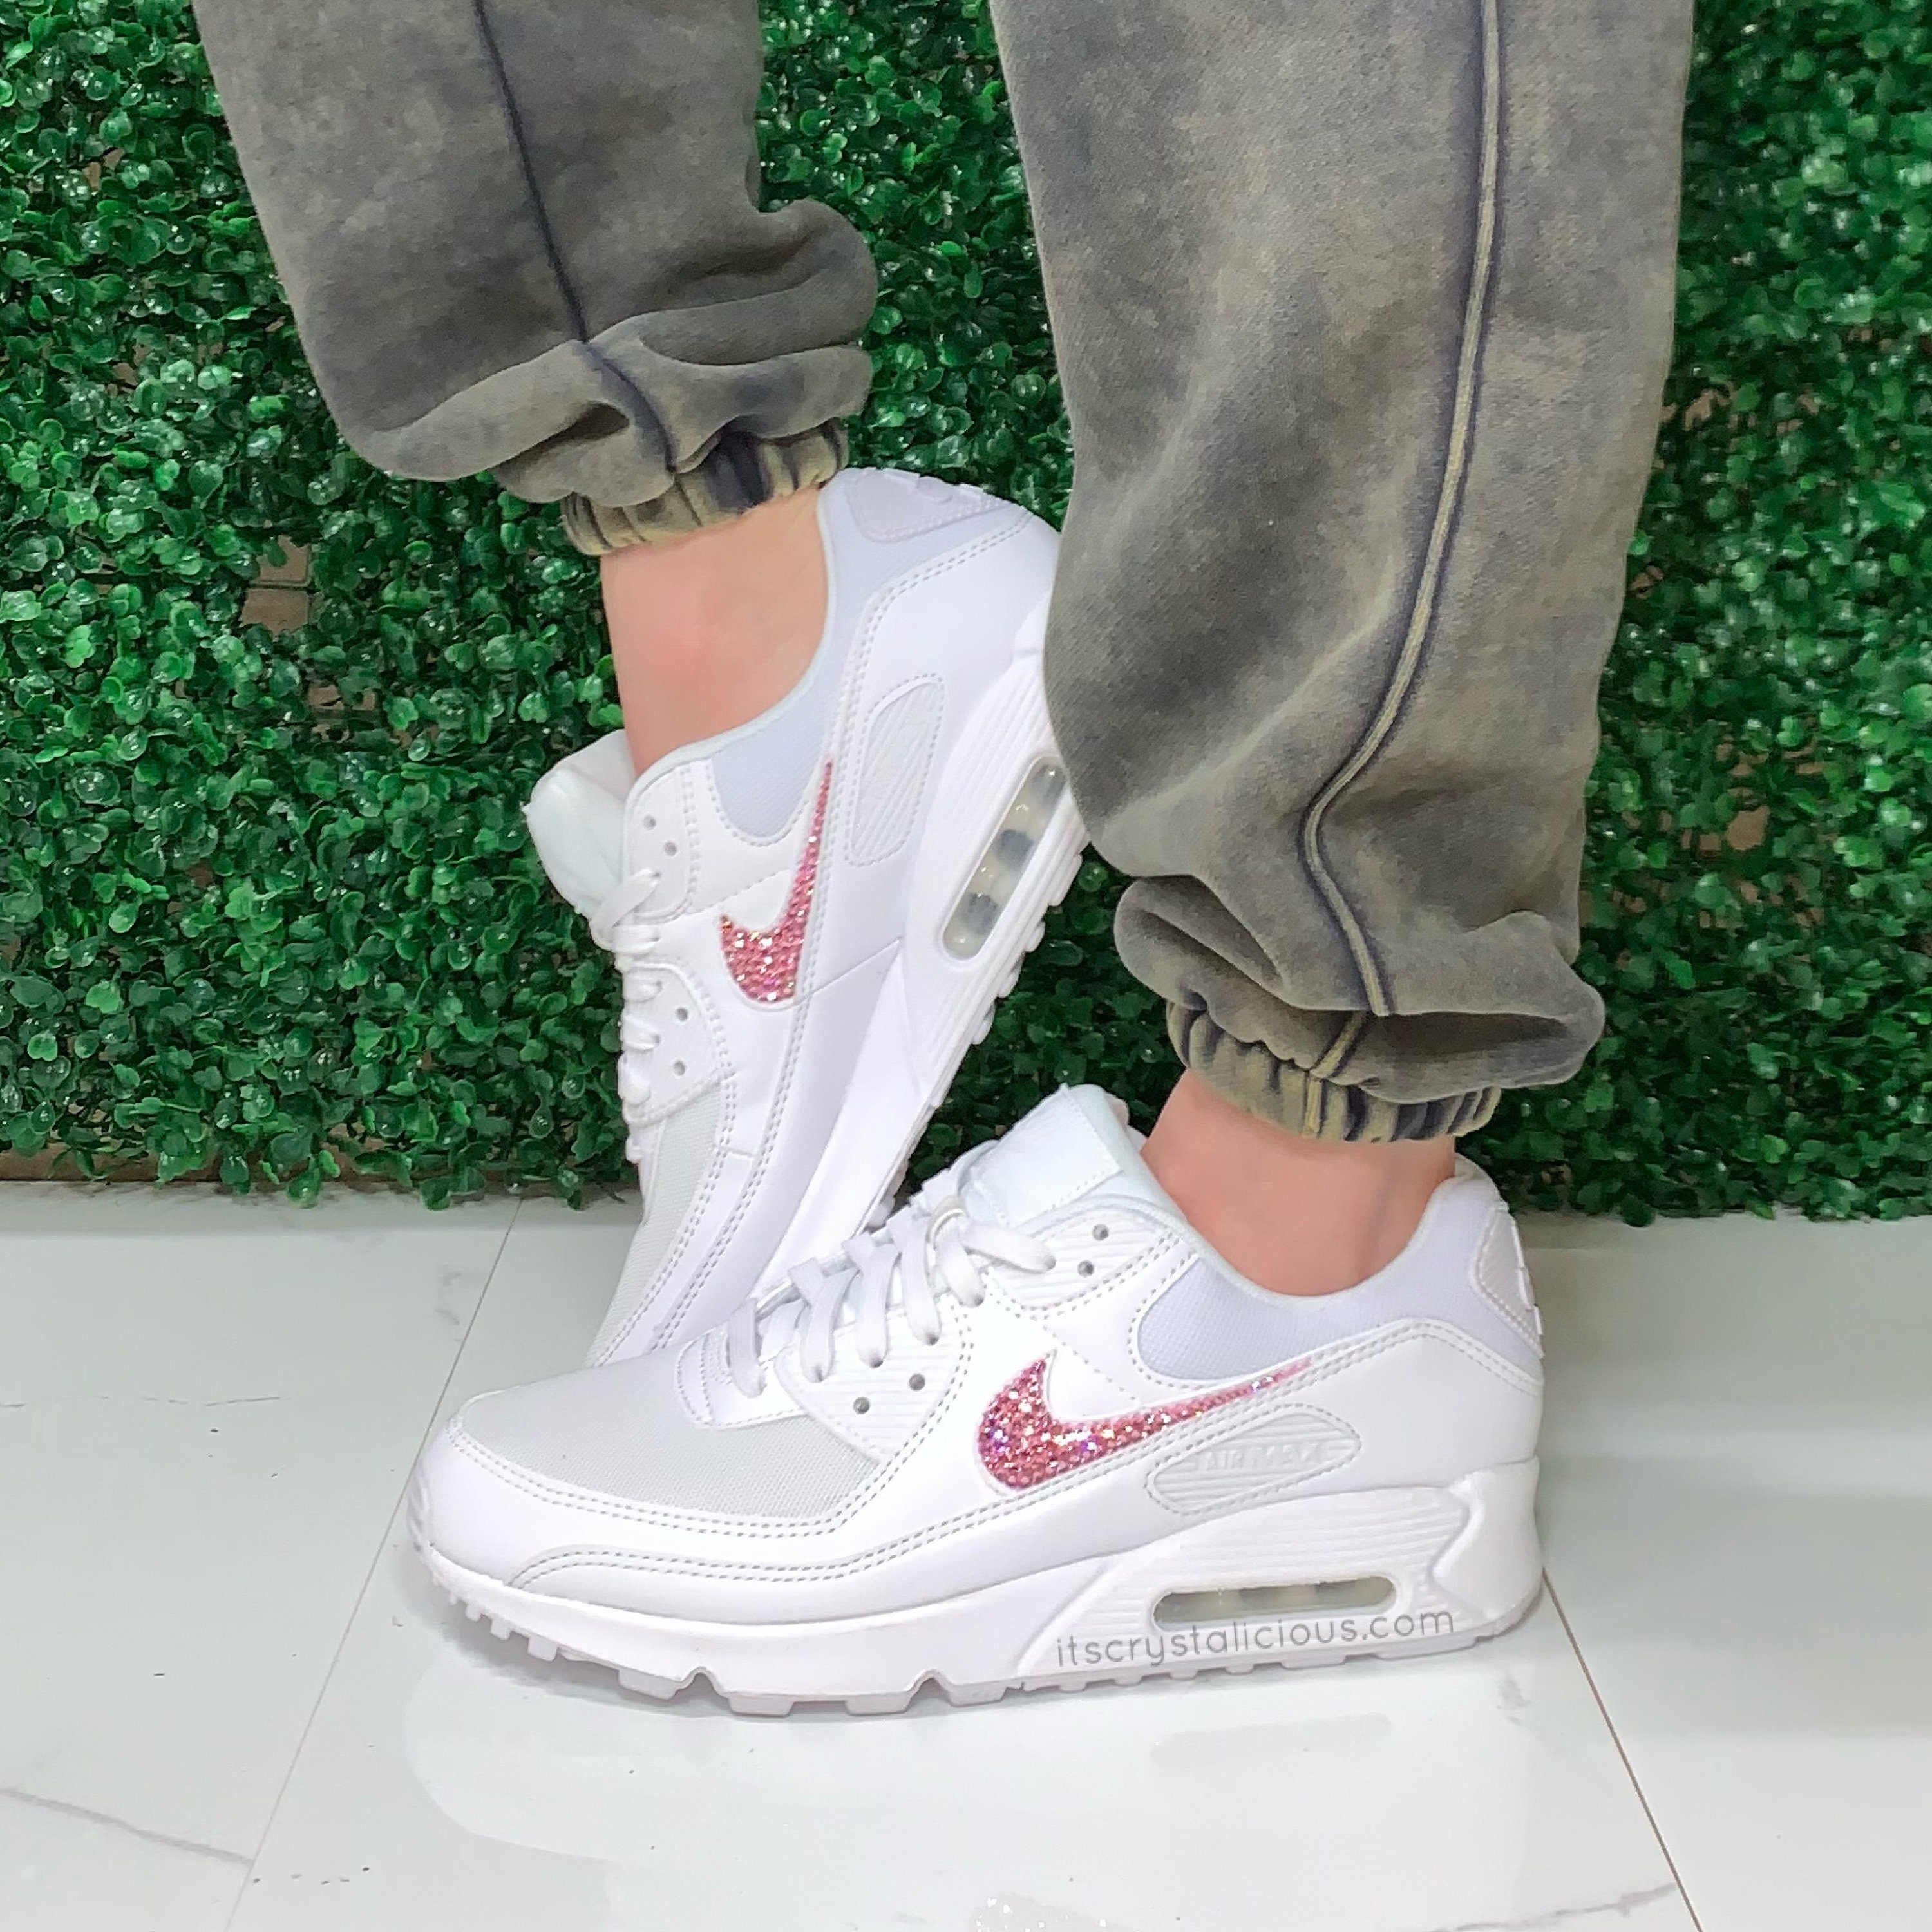 Genuine Nike Air Max 90s Embellished With Lt Rose Crystals - Etsy Israel